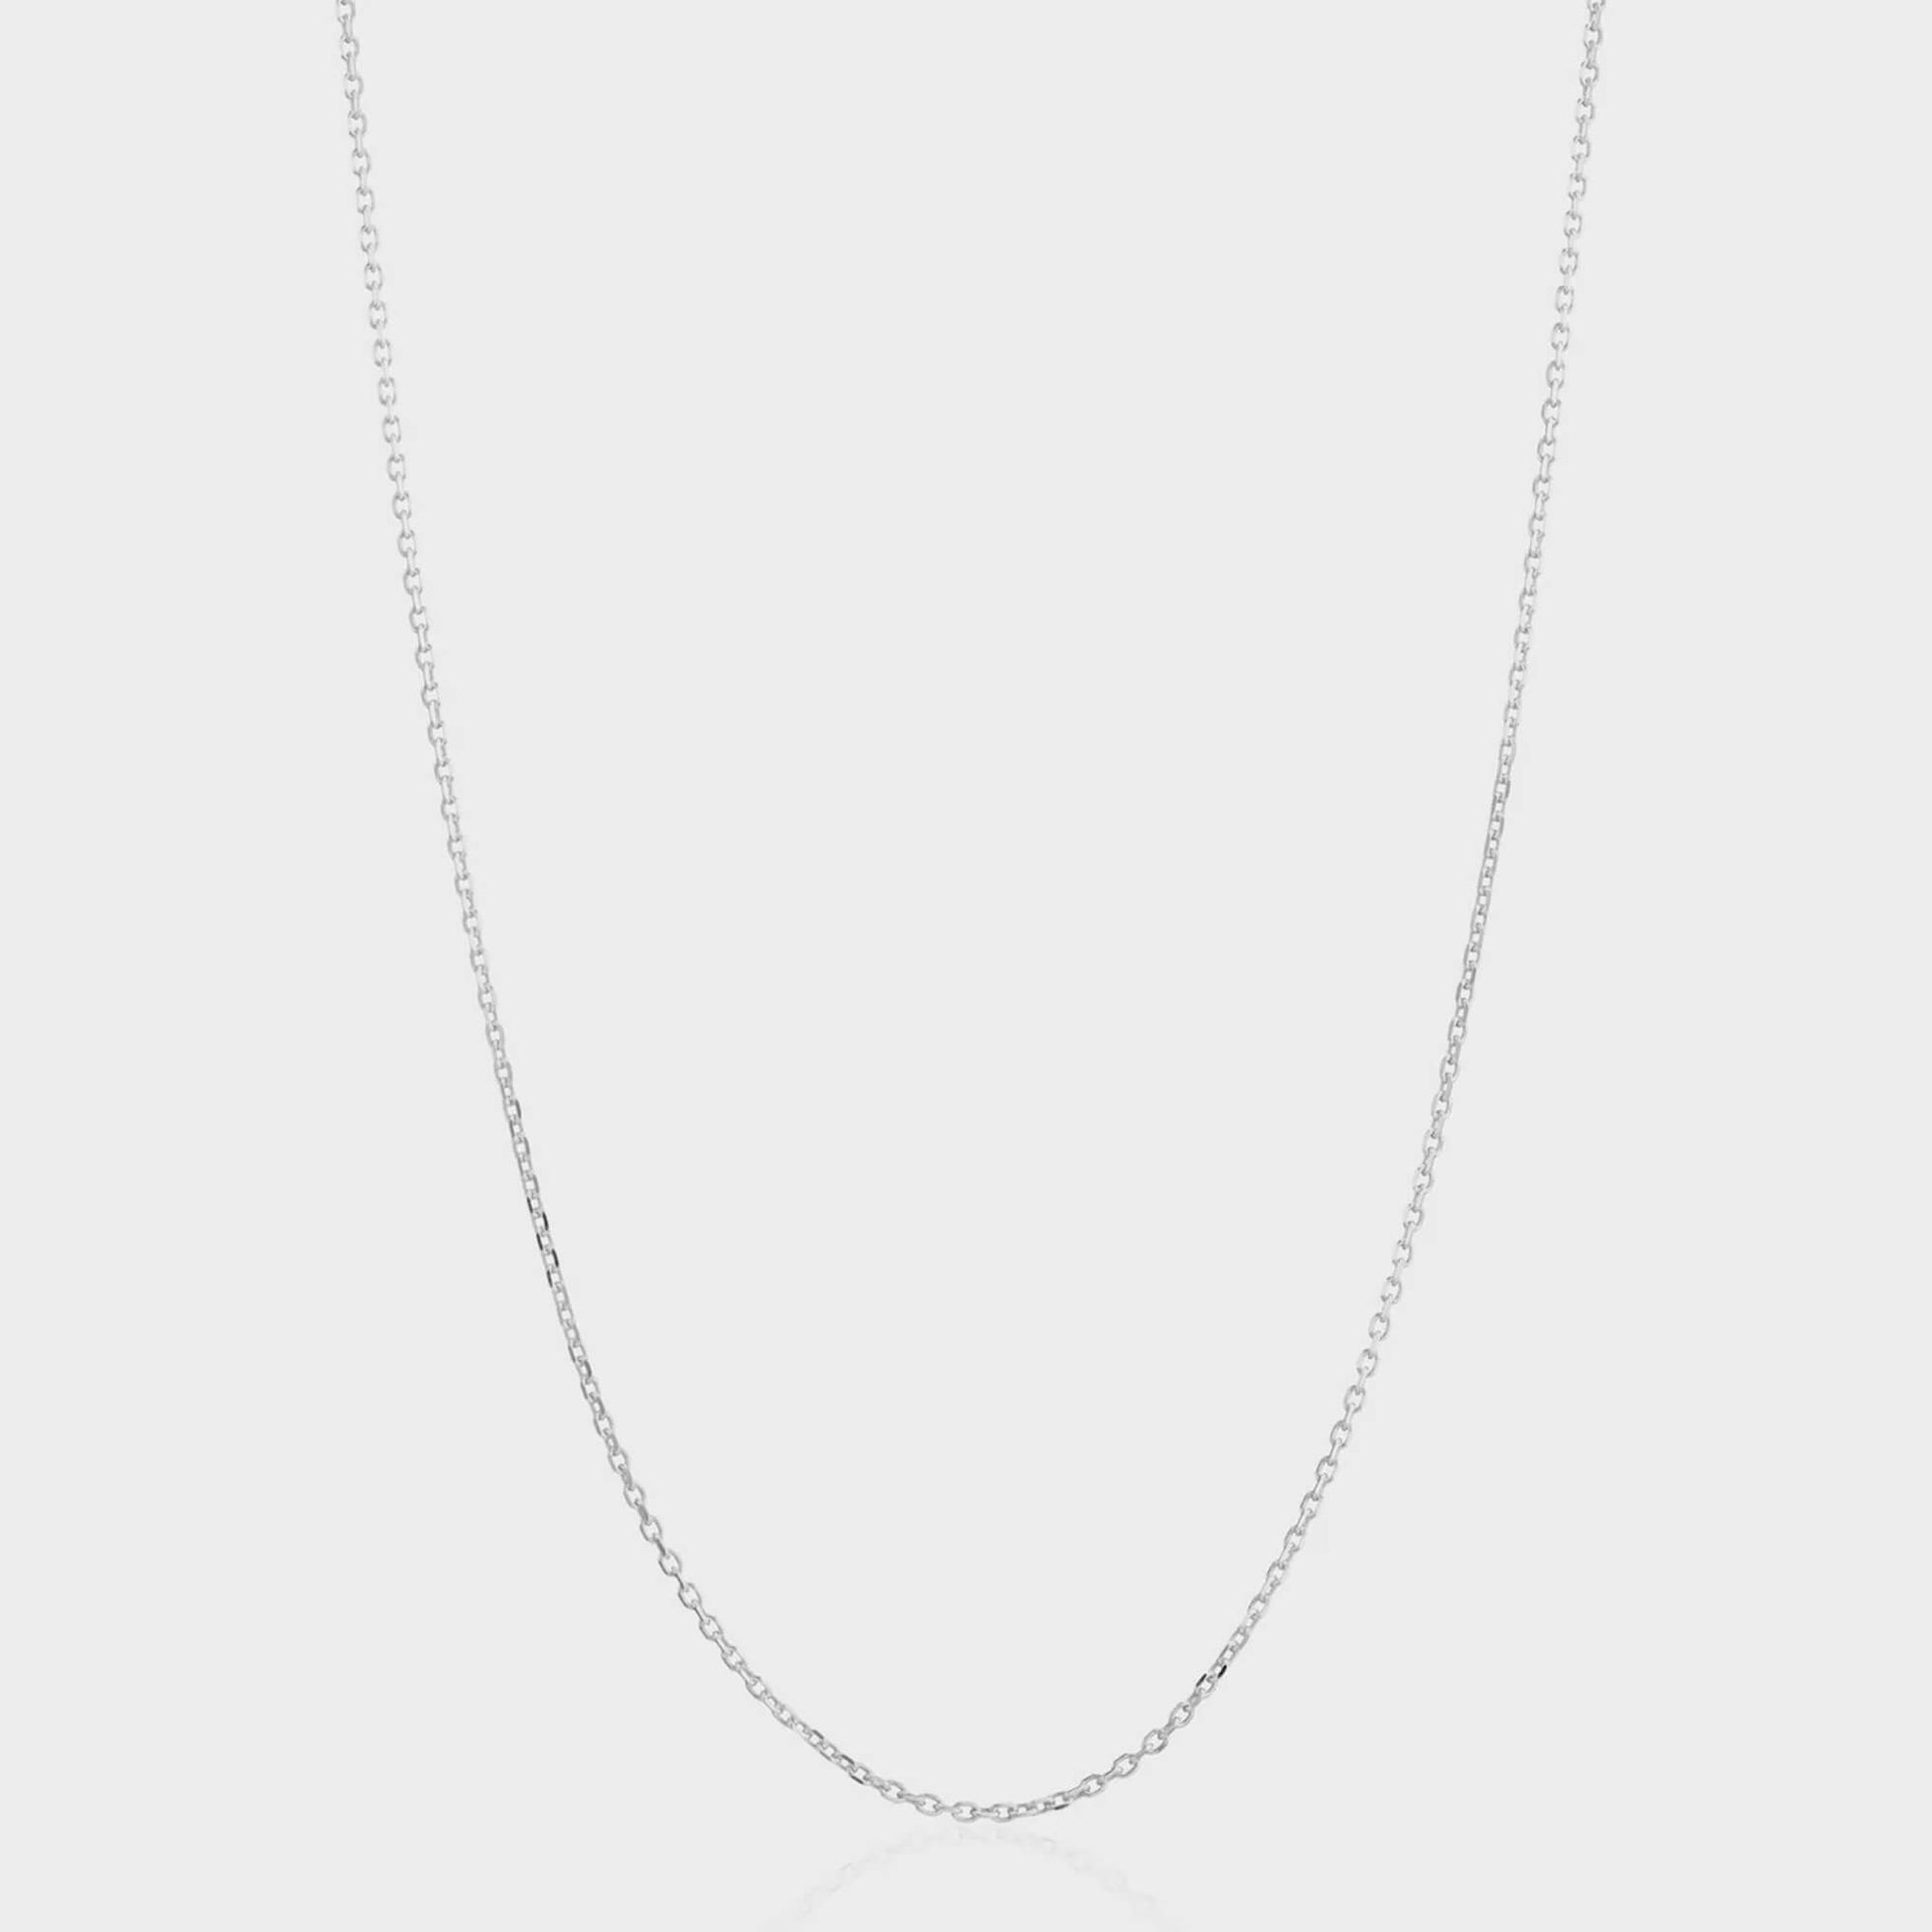 fine sterling silver trace chain necklace.